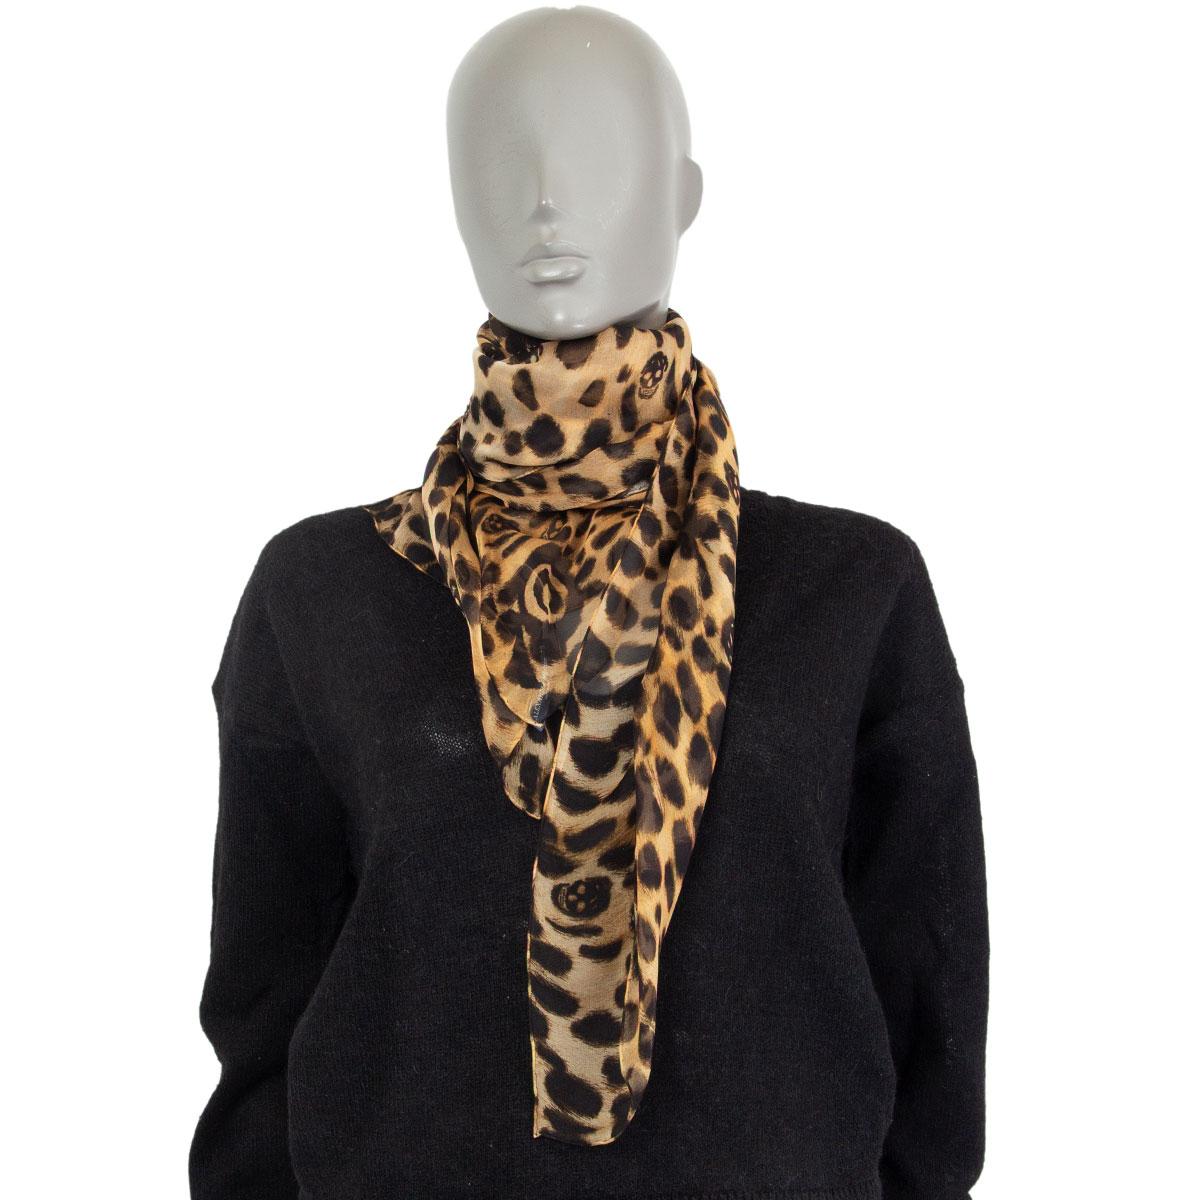 Alexander McQueen leopard skull chiffon scarf in espresso brown, brown, beige, light beige and off-white silk (100%). Has been worn and is in excellent condition. 

Width 135cm (52.7in)
Length 135cm (52.7in)
